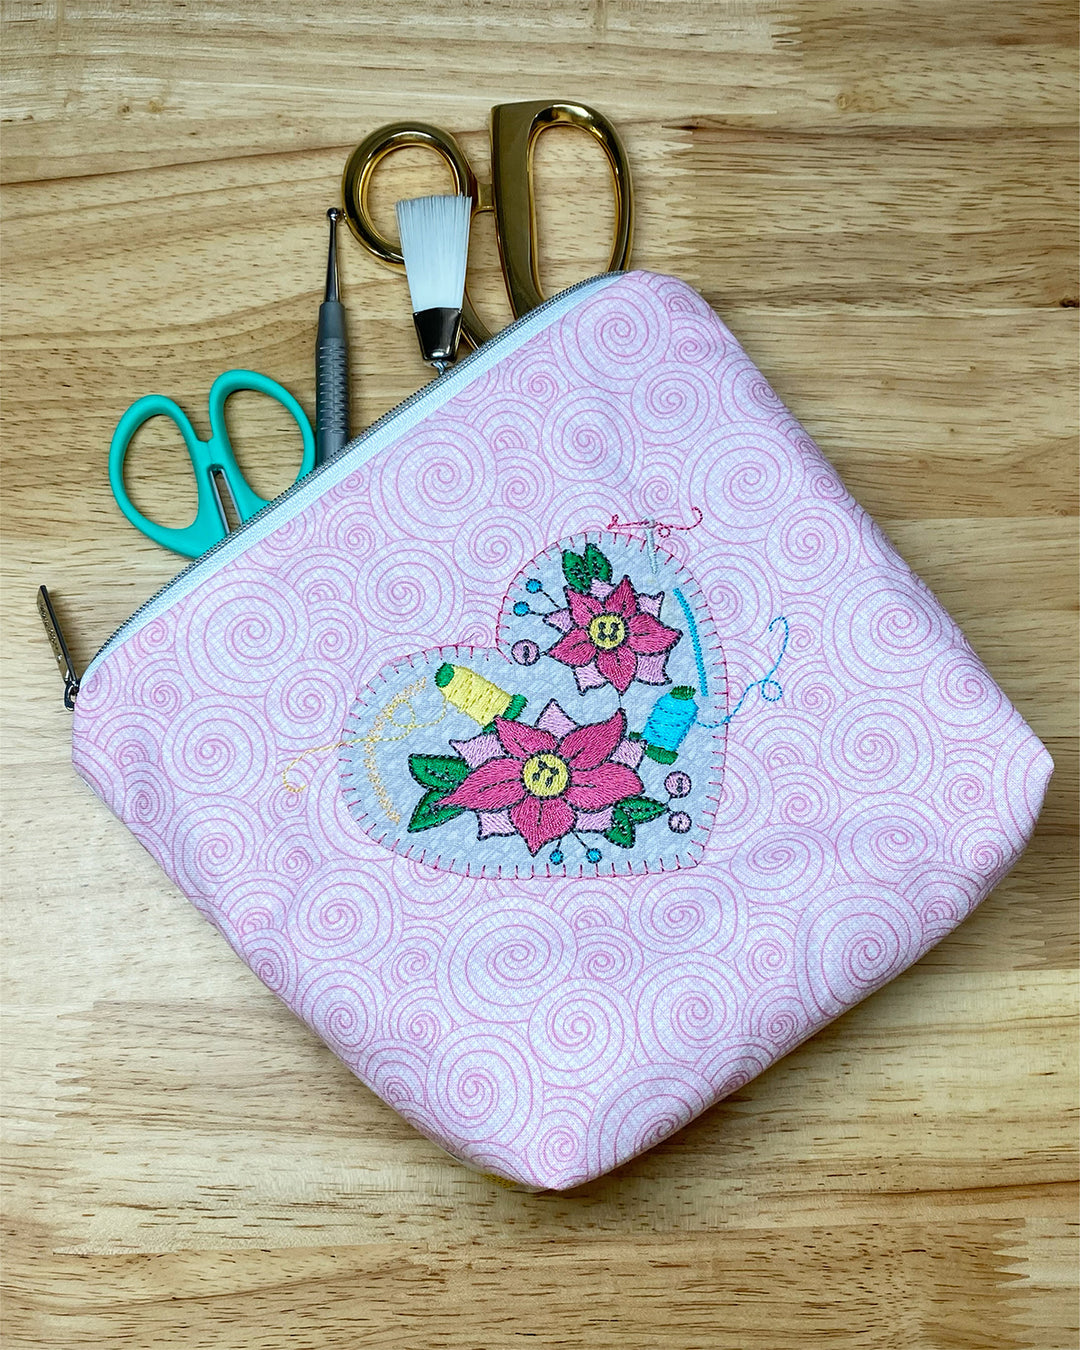 Sewing Heart Pouch